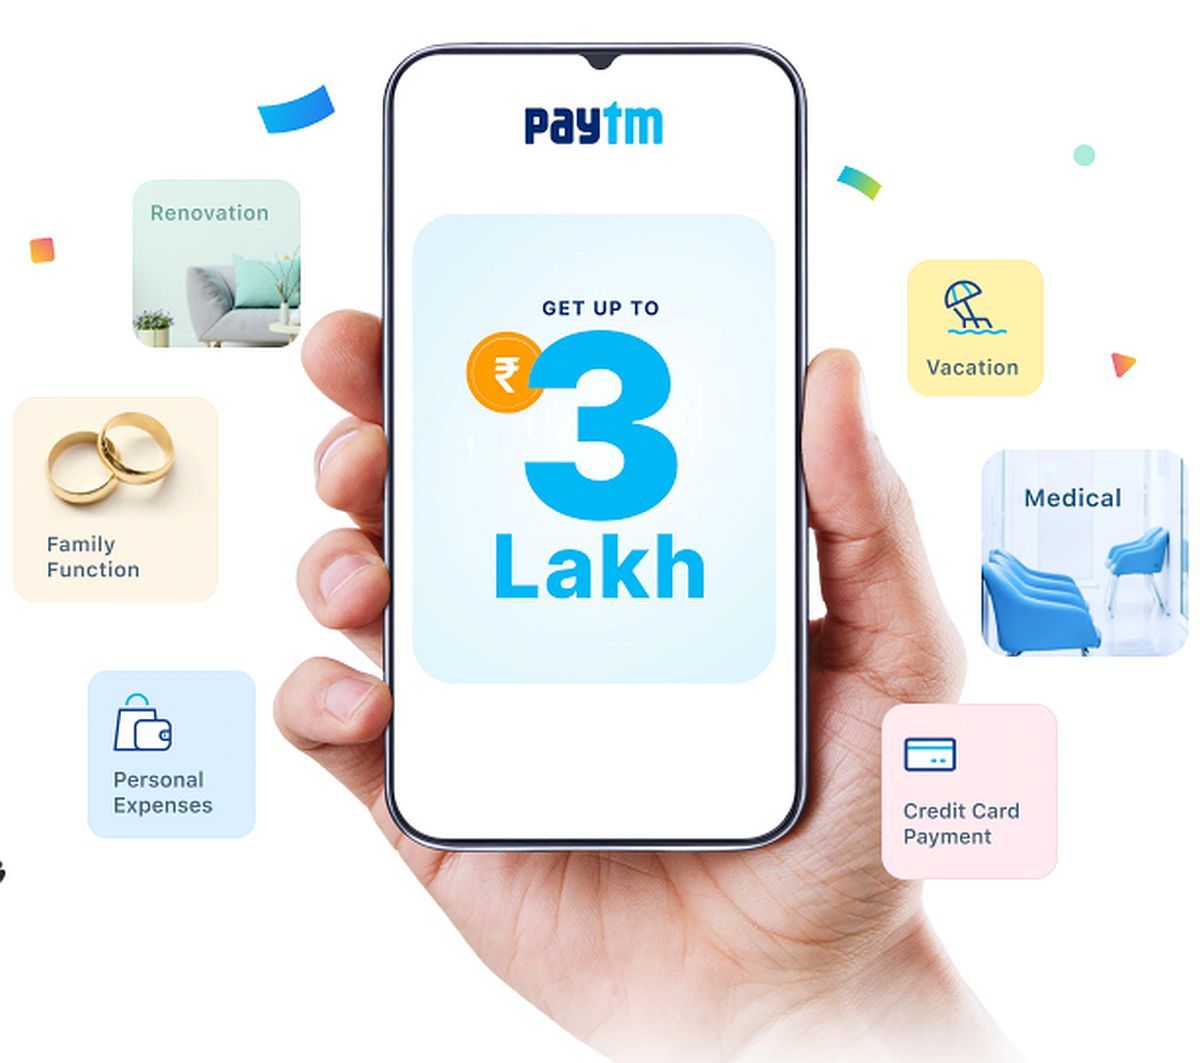 Paytm to Focus on High-Ticket Loans - News